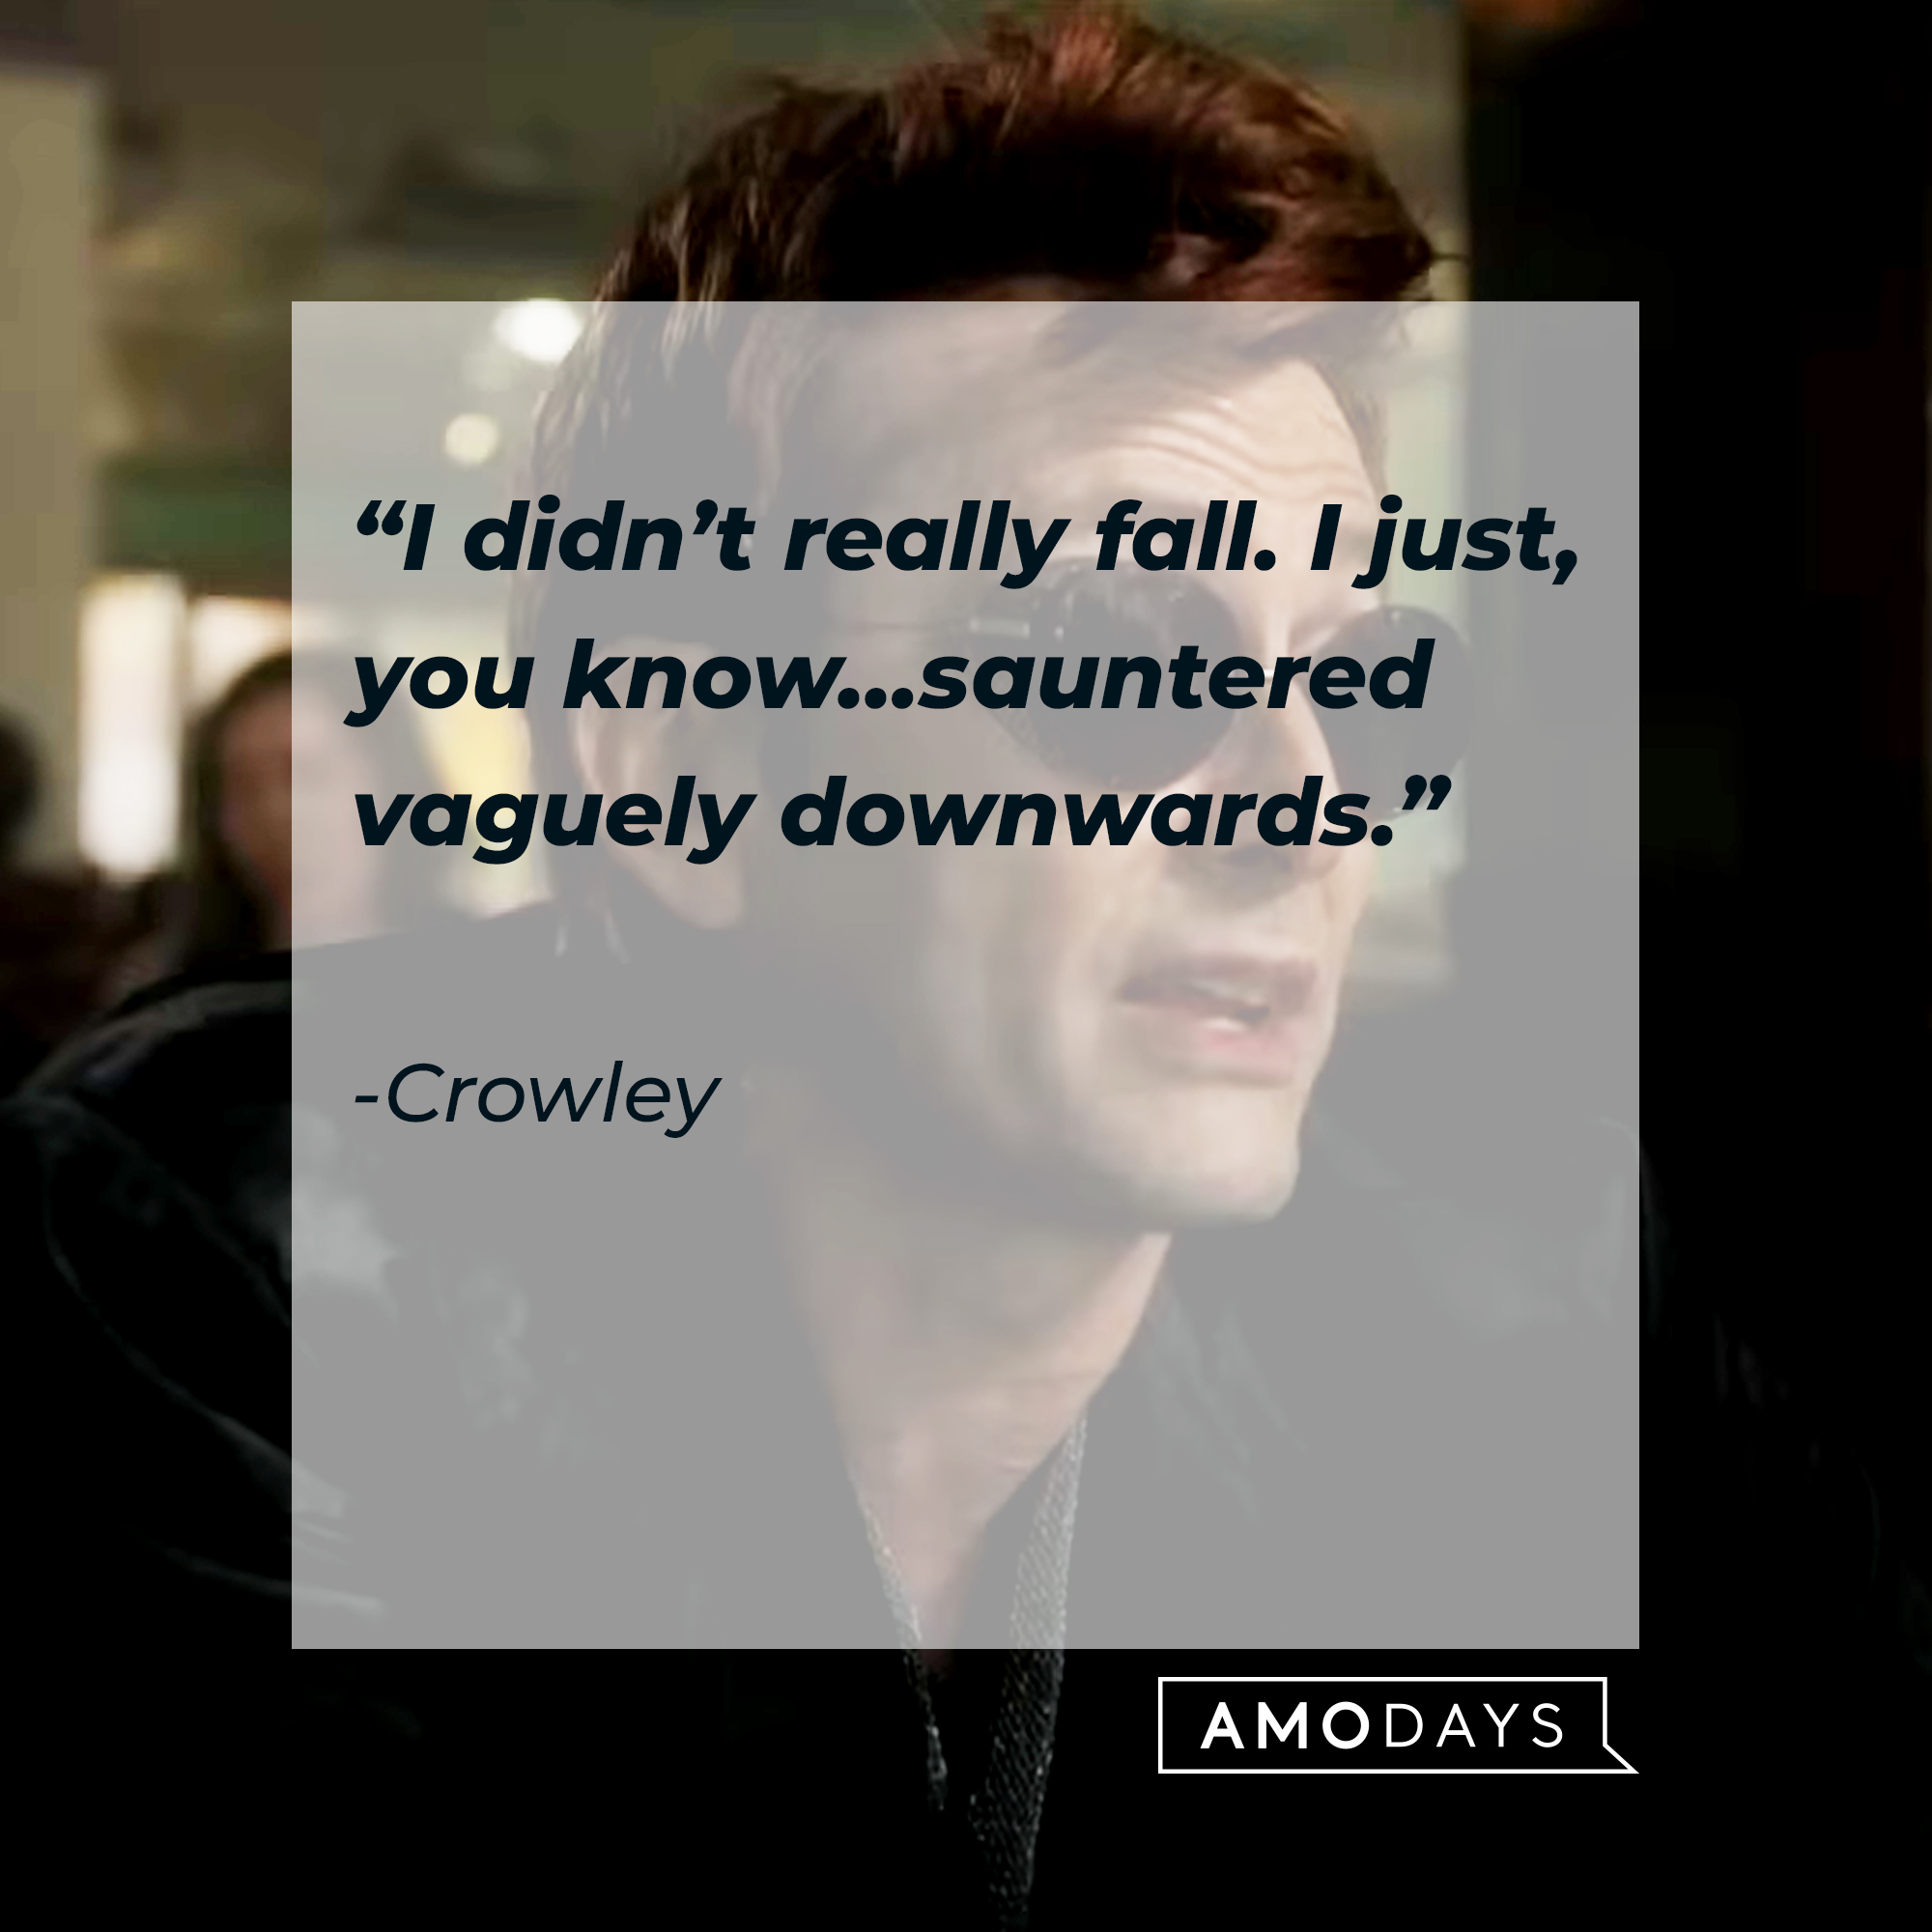 Crowley's quote: "I didn't really fall. I just, you know...sauntered vaguely downwards." | Source: Facebook.com/goodomensprime